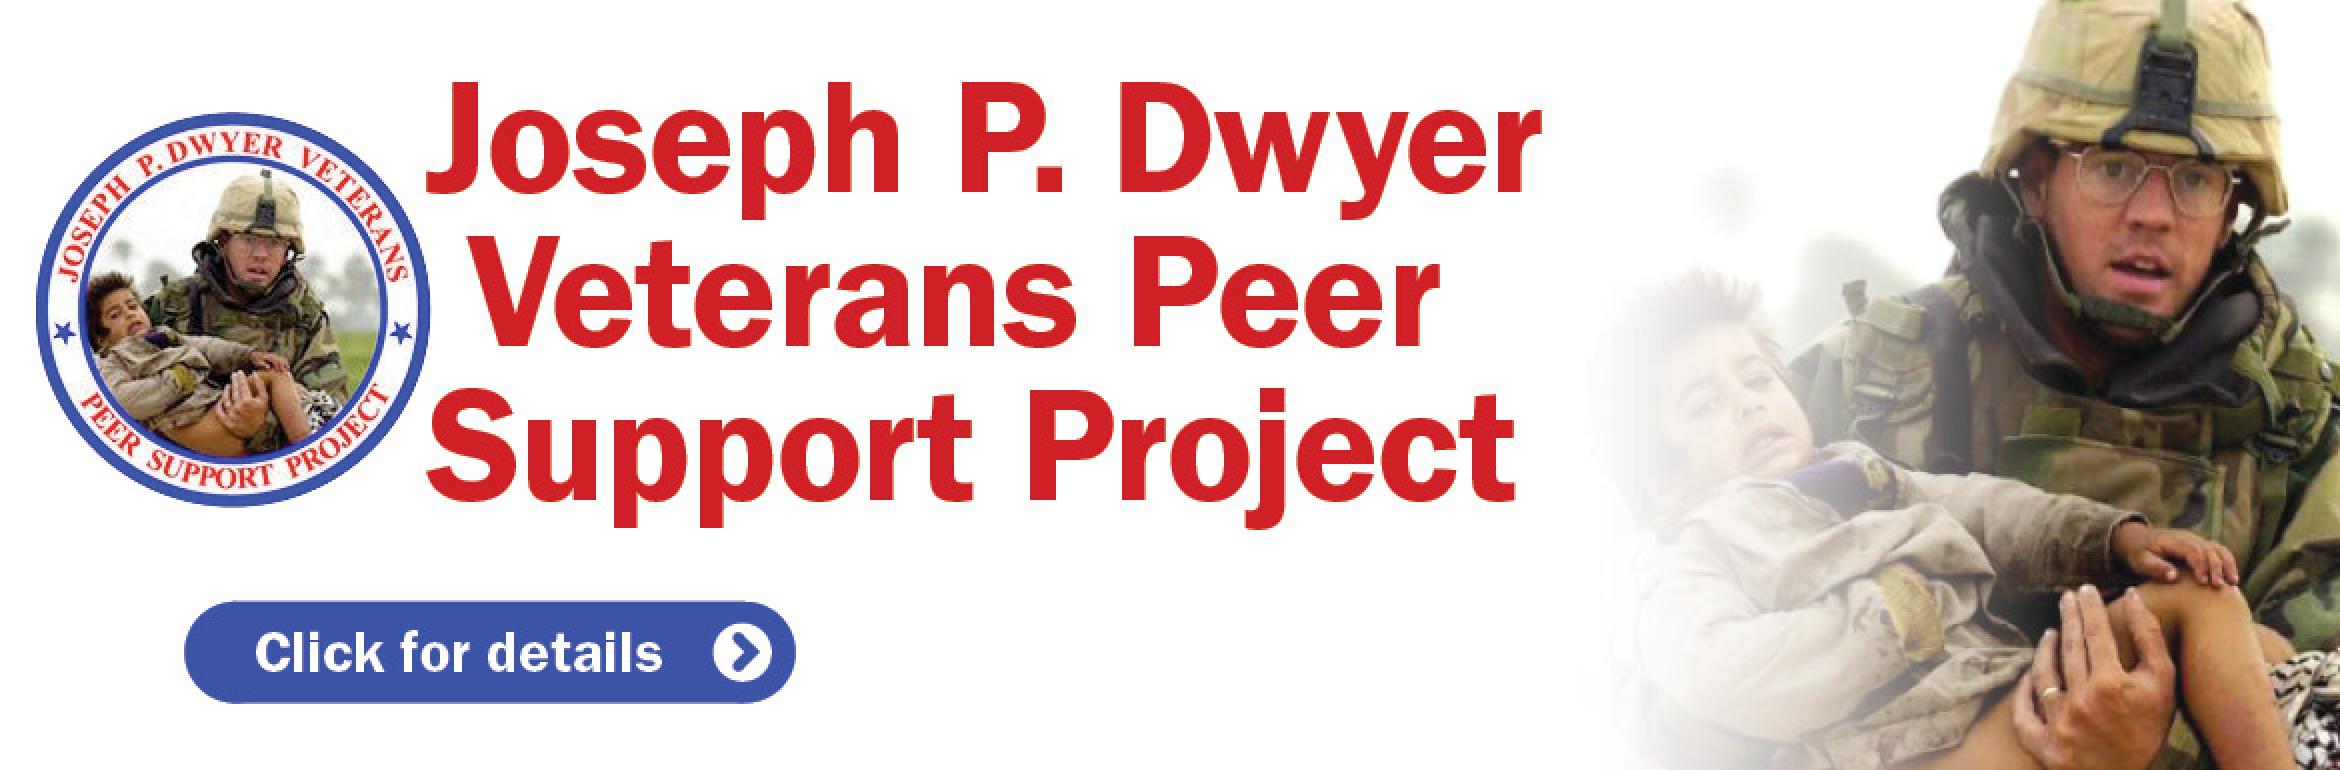 Joseph P. Dwyer Veterans Peer Support Project. Click for details.